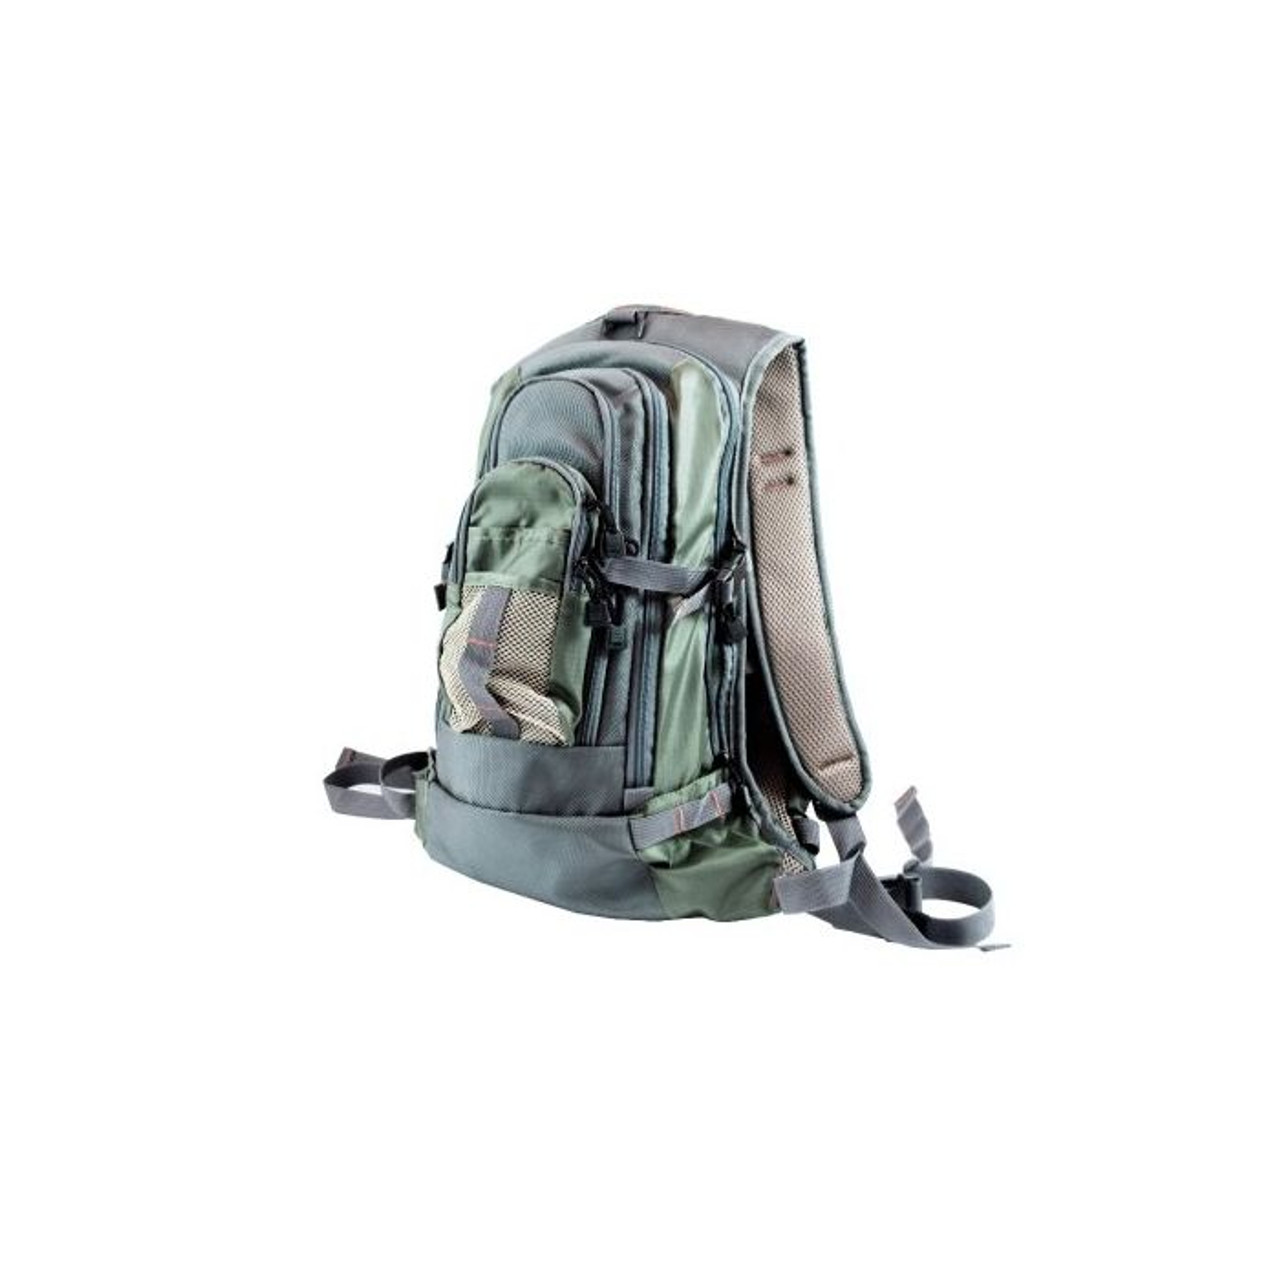 https://cdn11.bigcommerce.com/s-s7ib93jl4n/images/stencil/1280x1280/products/37320/34557/chest_bag_backpack__03602.1613677202.jpg?c=2?imbypass=on